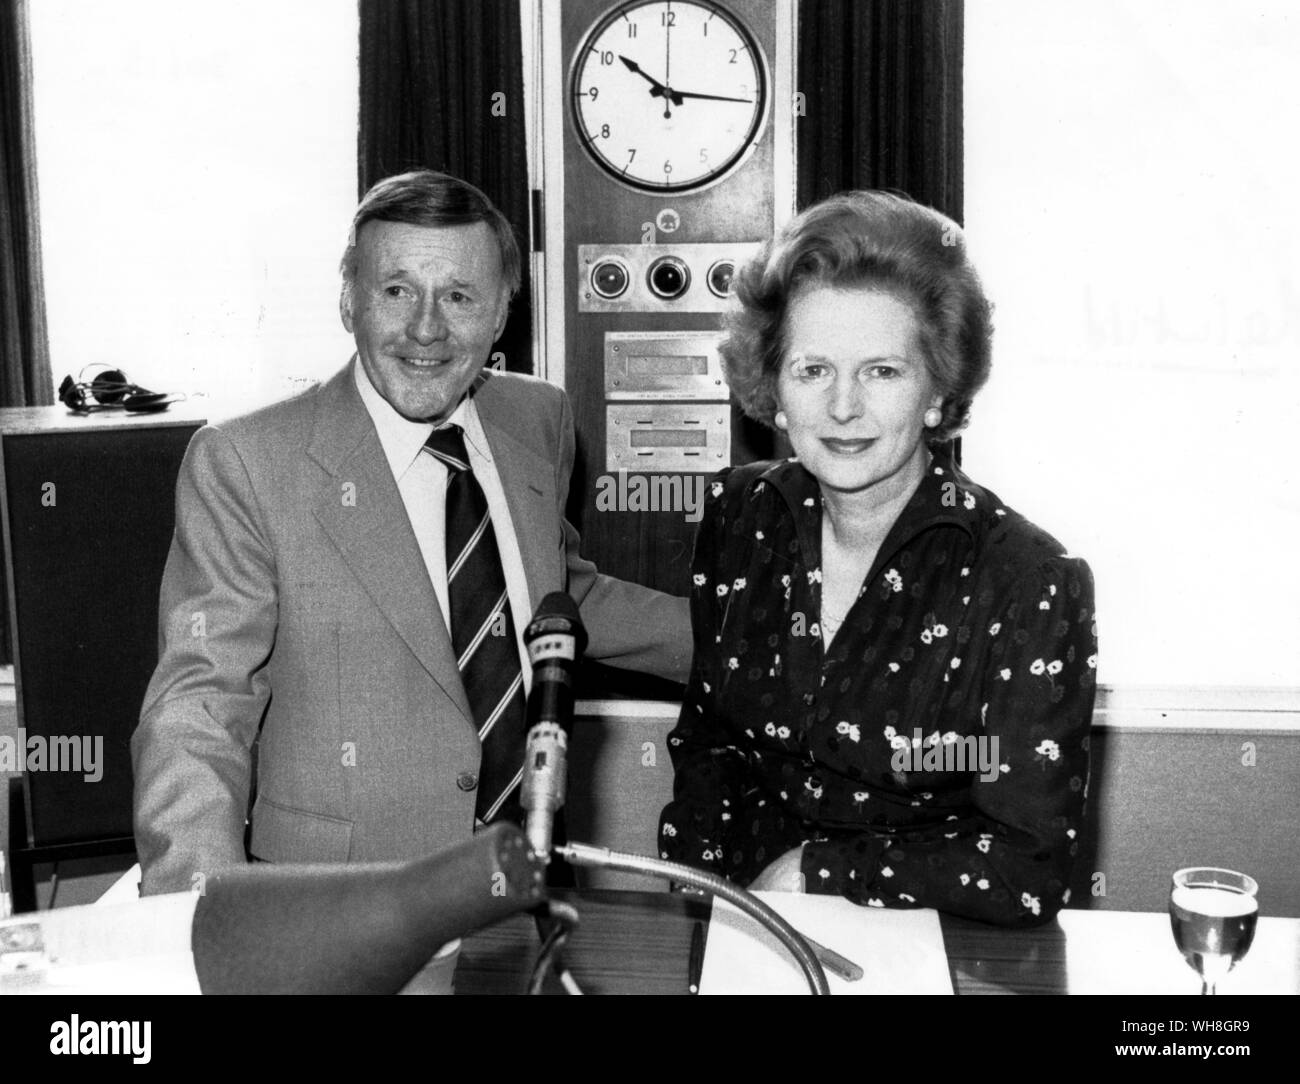 Jimmy Young and Mrs Margaret Thatcher 1981. Margaret Thatcher, the first female Prime Minister in Europe, is a guest on Jimmy Young's BBC Radio 2 programme.. . Stock Photo